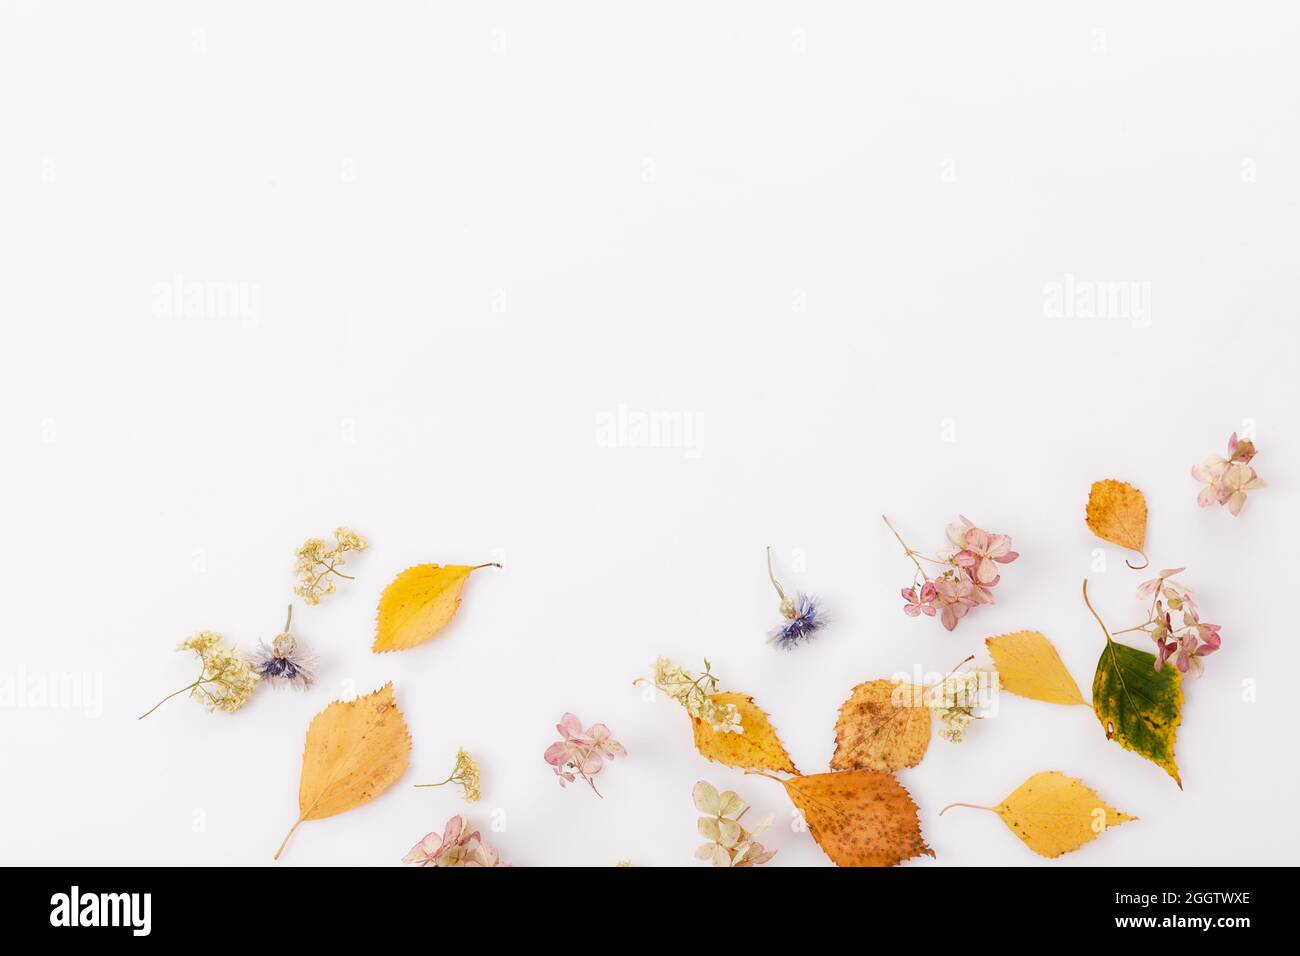 Autumn composition made of autumn dry multi-colored leaves on white wooden background. Autumn, fall concept. Flat lay, top view Stock Photo